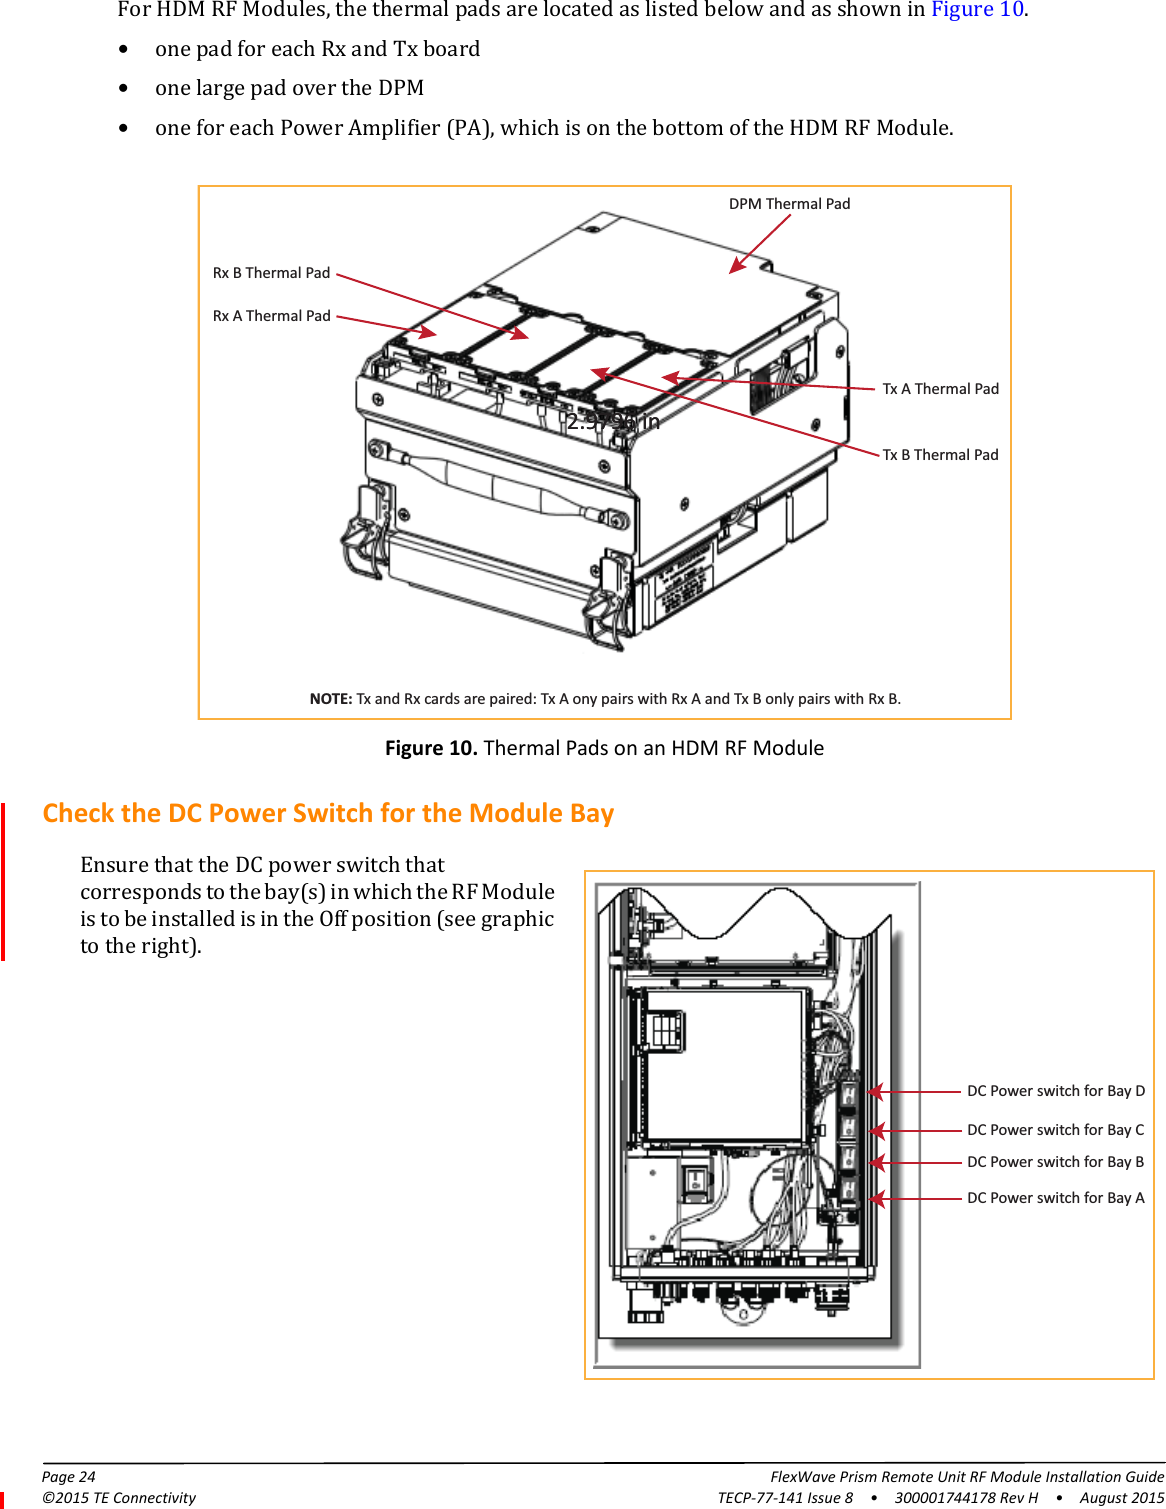 Page 24 FlexWave Prism Remote Unit RF Module Installation Guide©2015 TE Connectivity TECP-77-141 Issue 8  •  300001744178 Rev H  •  August 2015For HDM RF Modules, the thermal pads are located as listed below and as shown in Figure 10.•one pad for each Rx and Tx board•one large pad over the DPM•one for each Power Amplifier (PA), which is on the bottom of the HDM RF Module. DPM Thermal PadTx A Thermal PadTx B Thermal PadRx A Thermal PadRx B Thermal Pad2.9796 in2.9796 inNOTE: Tx and Rx cards are paired: Tx A ony pairs with Rx A and Tx B only pairs with Rx B.Figure 10. Thermal Pads on an HDM RF ModuleCheck the DC Power Switch for the Module BayDC Power switch for Bay ADC Power switch for Bay BDC Power switch for Bay CDC Power switch for Bay DEnsure that the DC power switch that corresponds to the bay(s) in which the RF Module is to be installed is in the Off position (see graphic to the right).